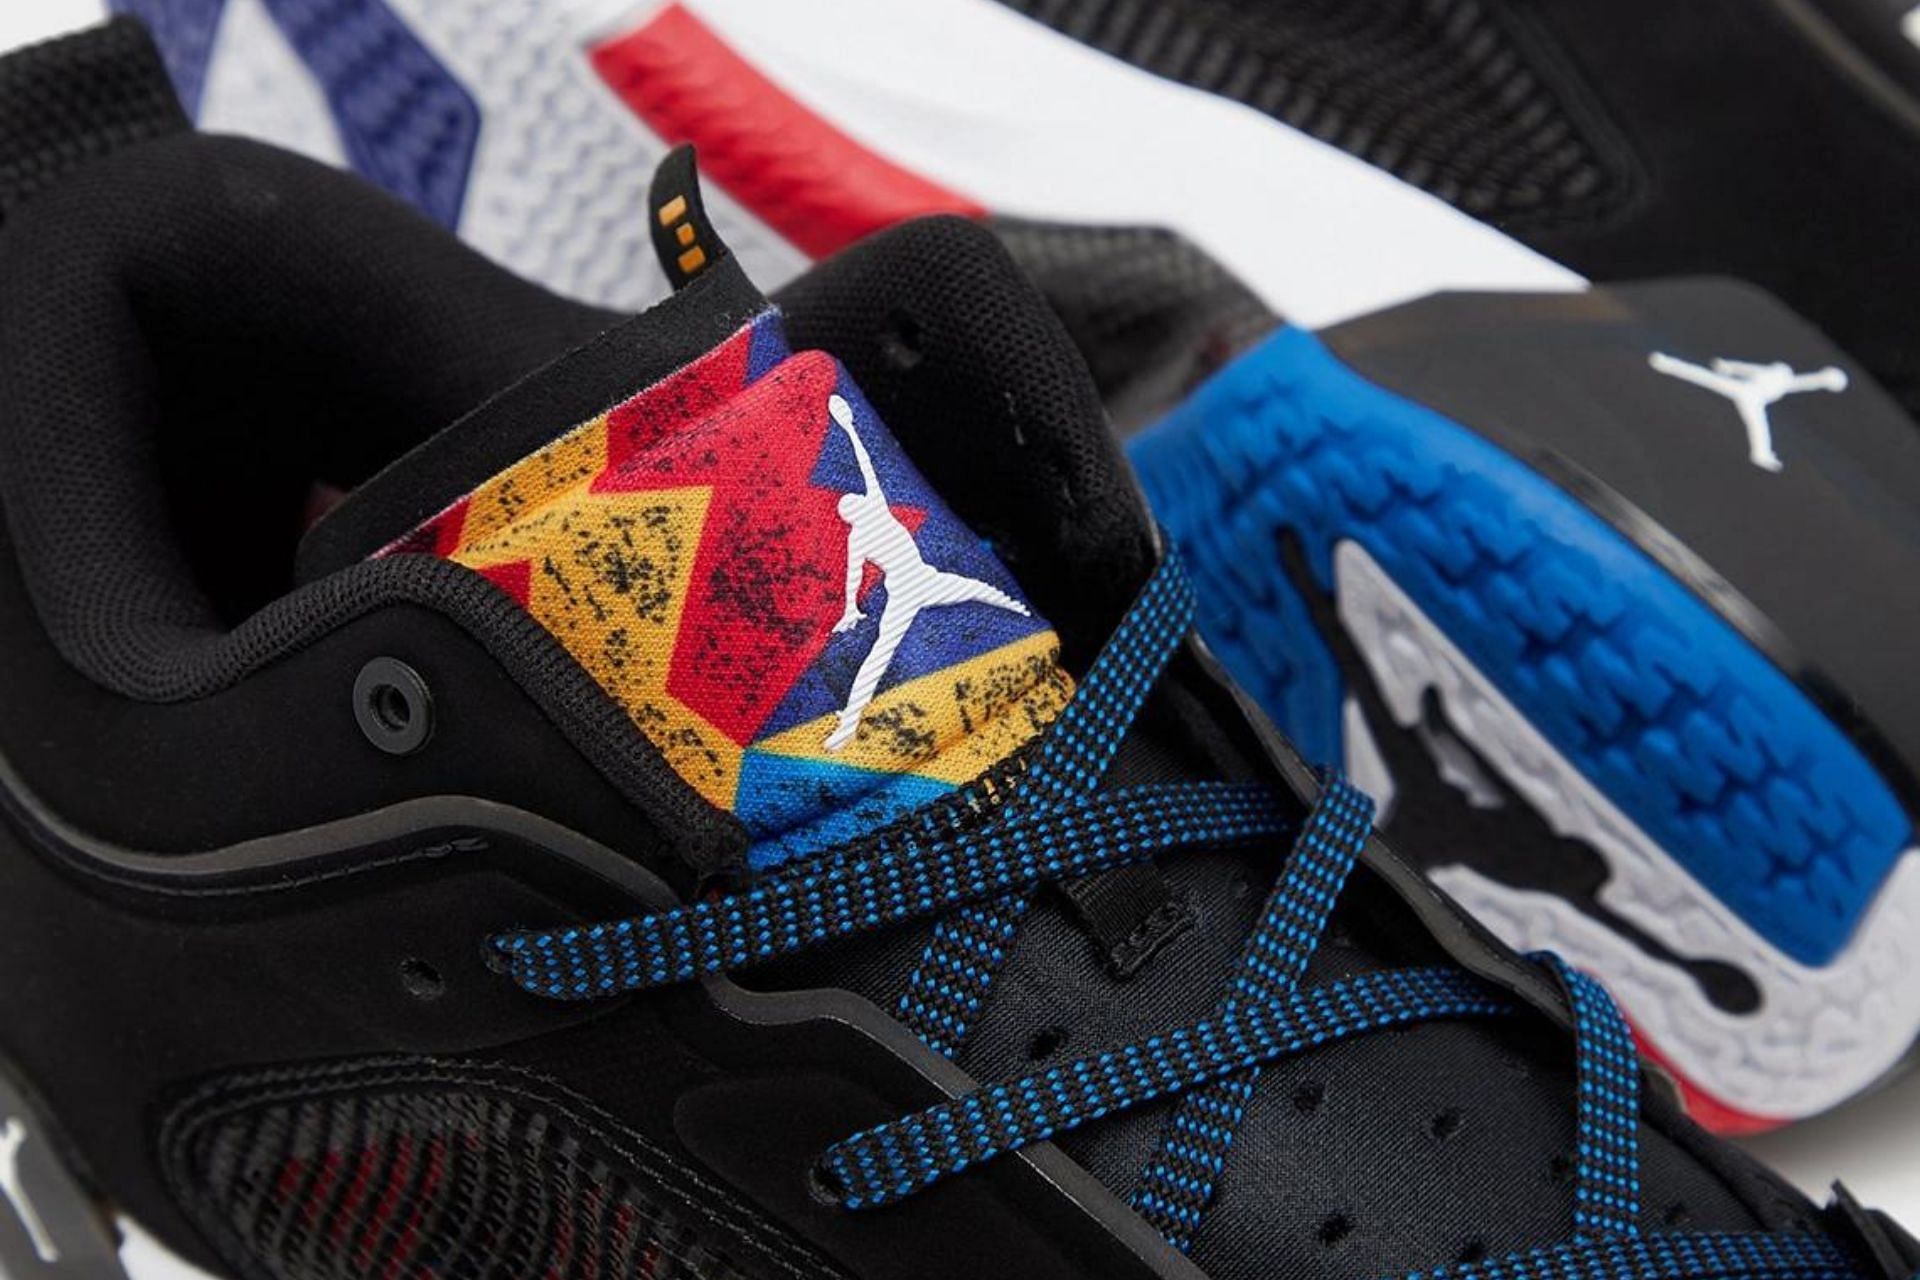 Take a closer look at the tongue area of the shoes (Image via JD Sports)